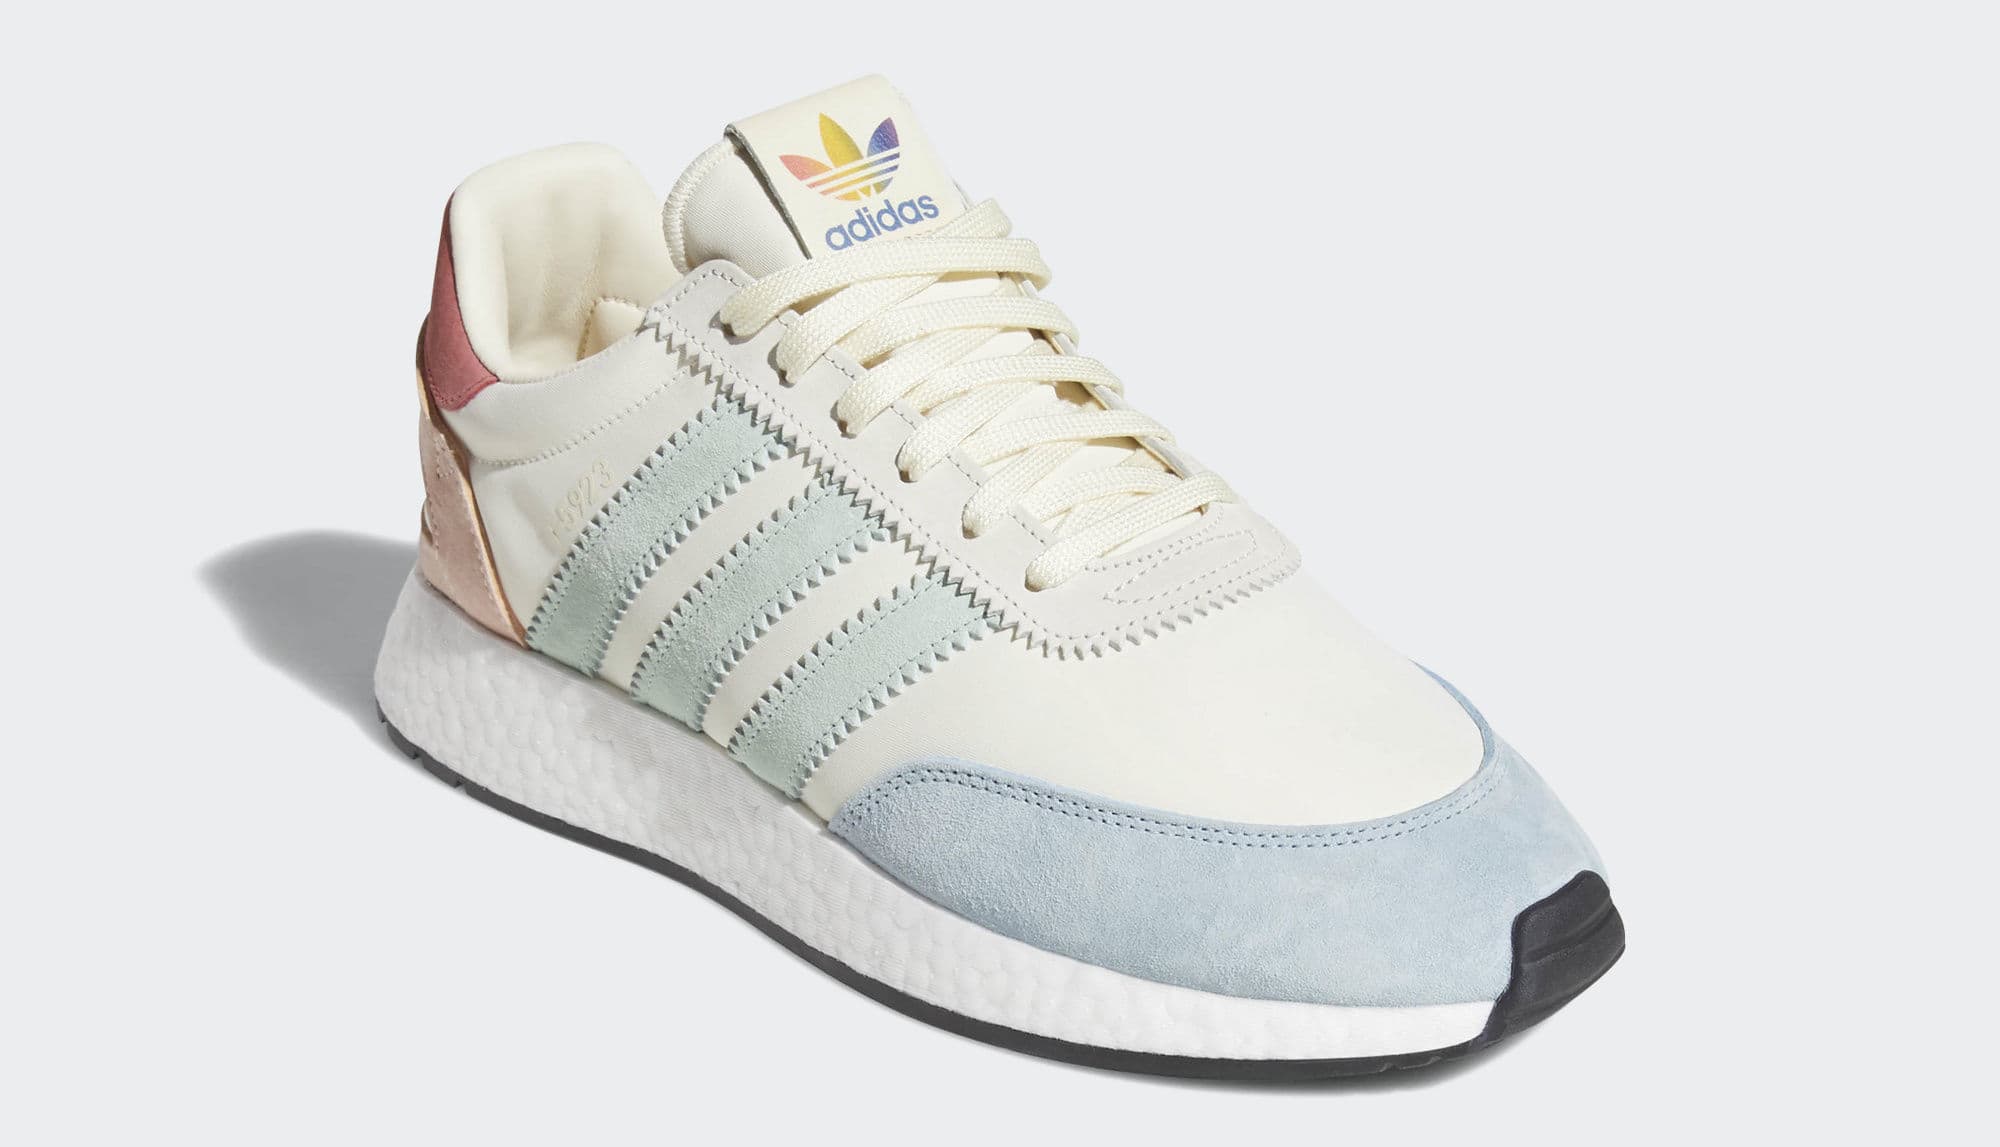 Adidas 2018 LGBT Pride Pack Release Date | Sole Collector